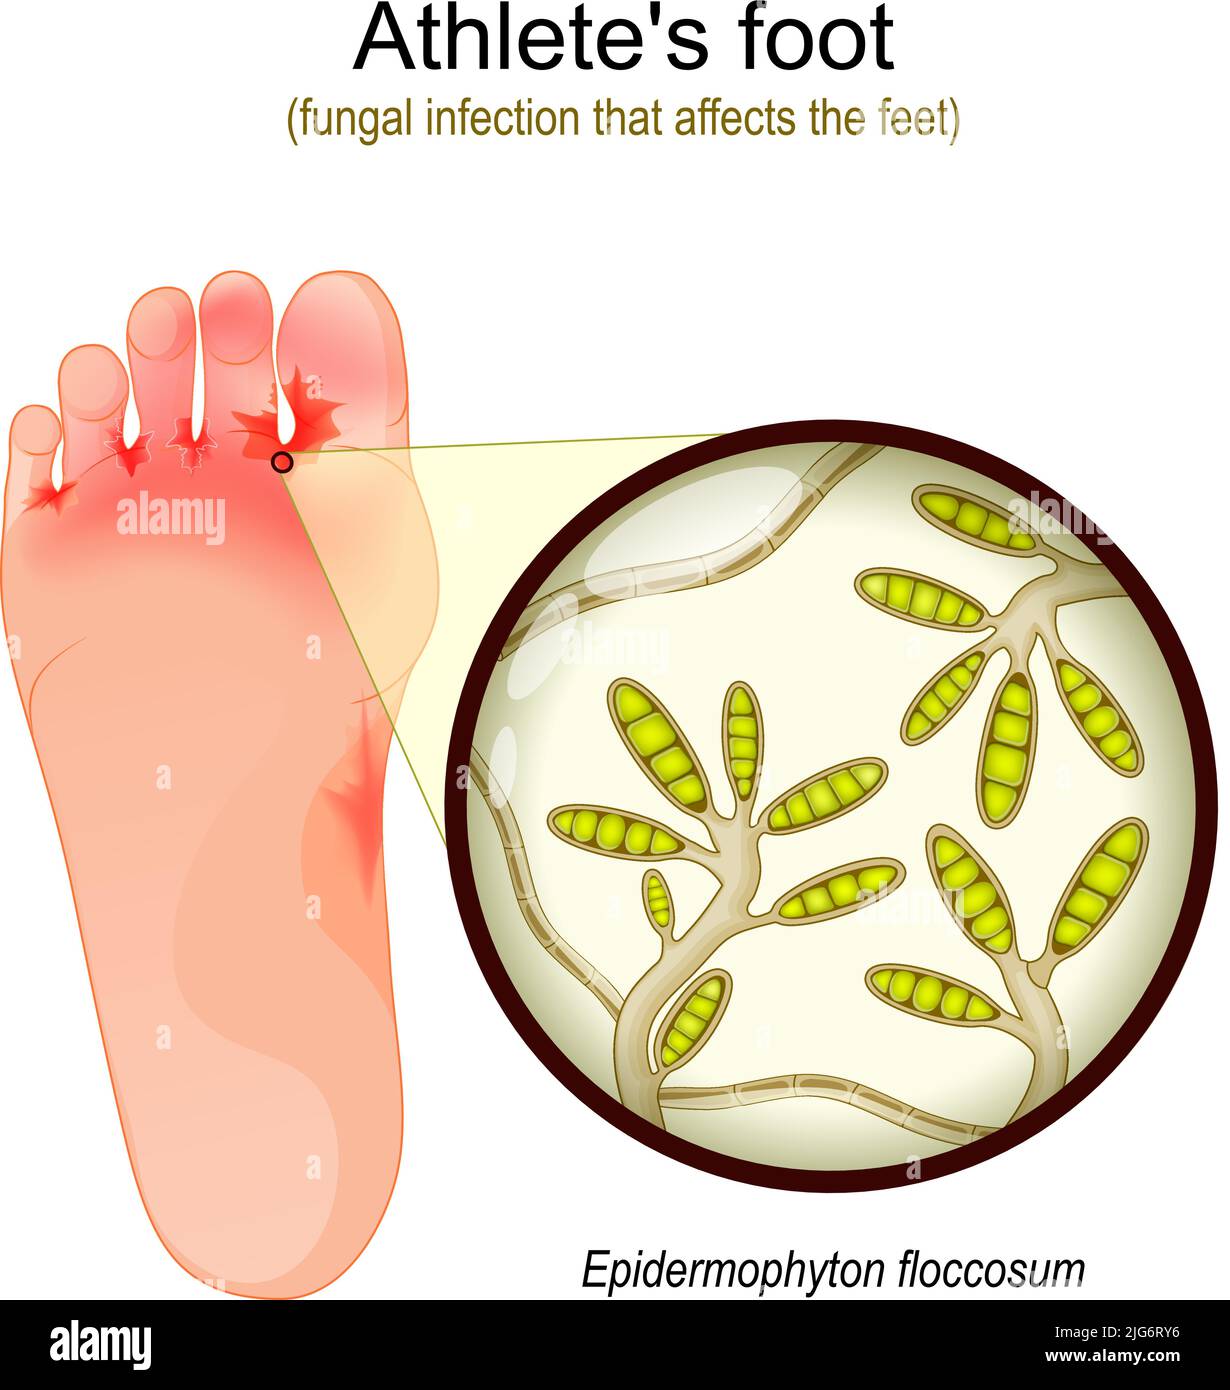 Athlete's foot. fungal infection that affects the feet. Close-up of yeast that causes infection disease of skin. Epidermophyton floccosum. vector illu Stock Vector